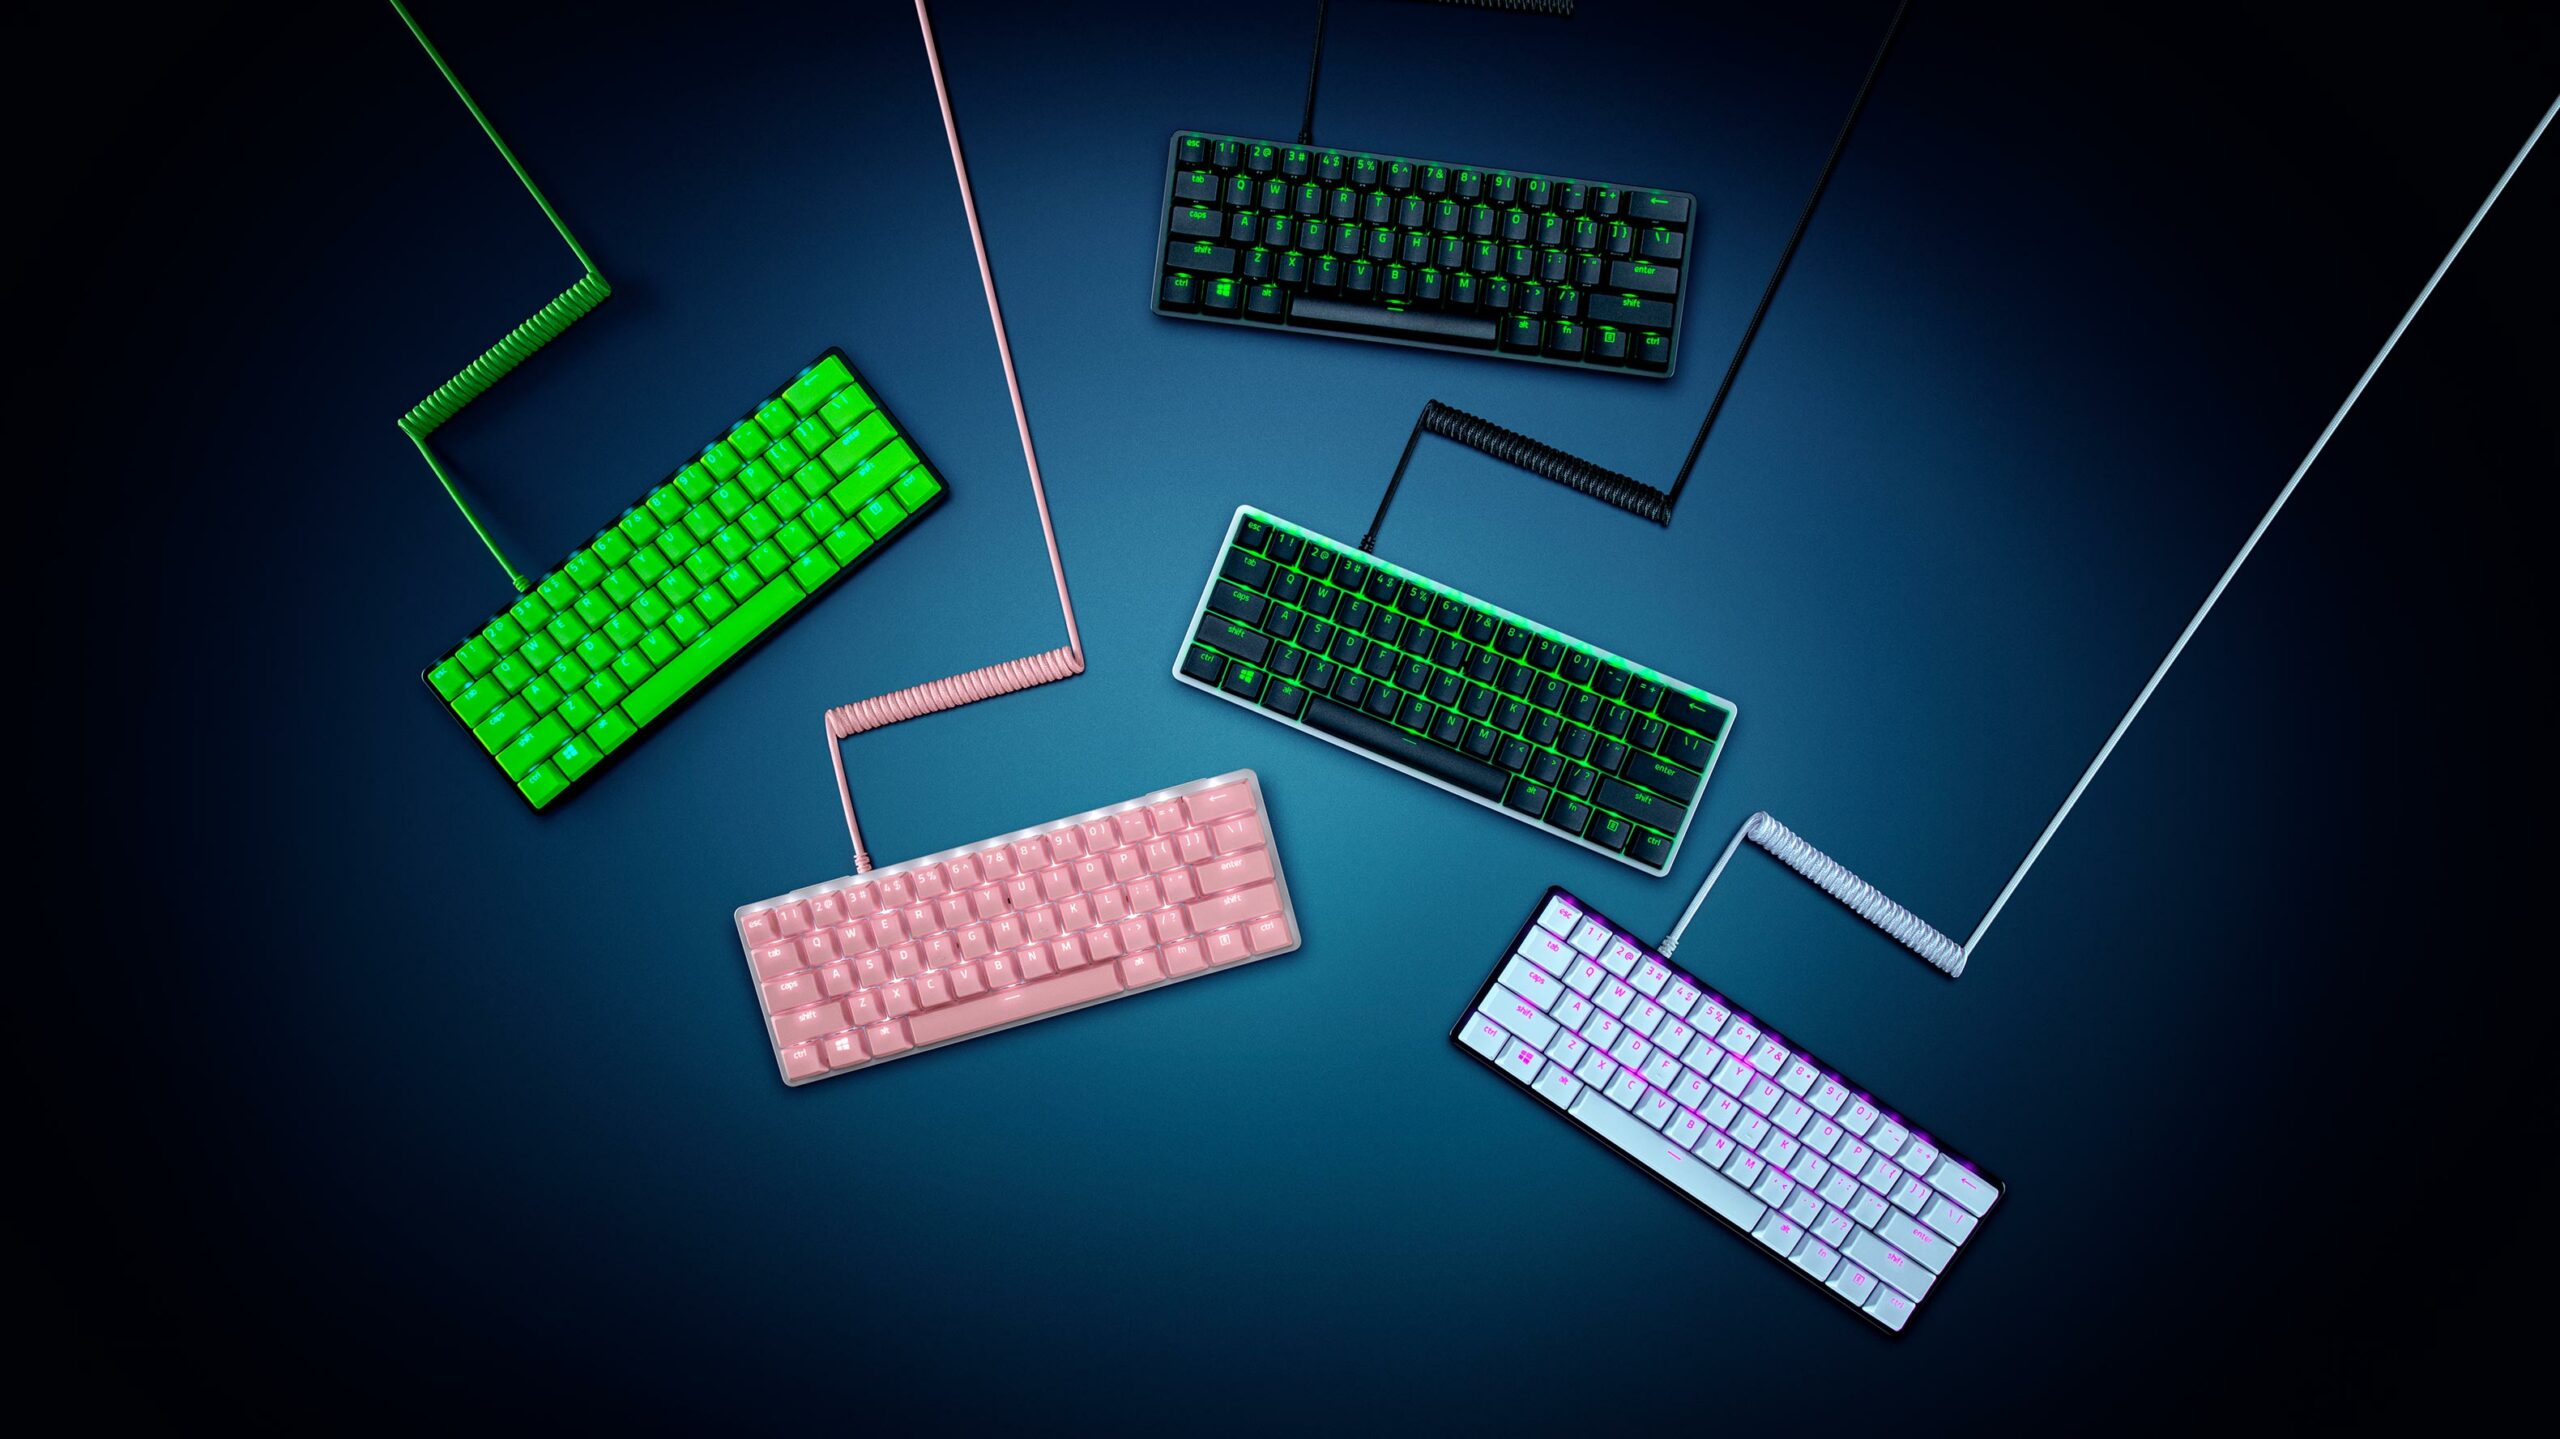 Accessories For Your Keyboard